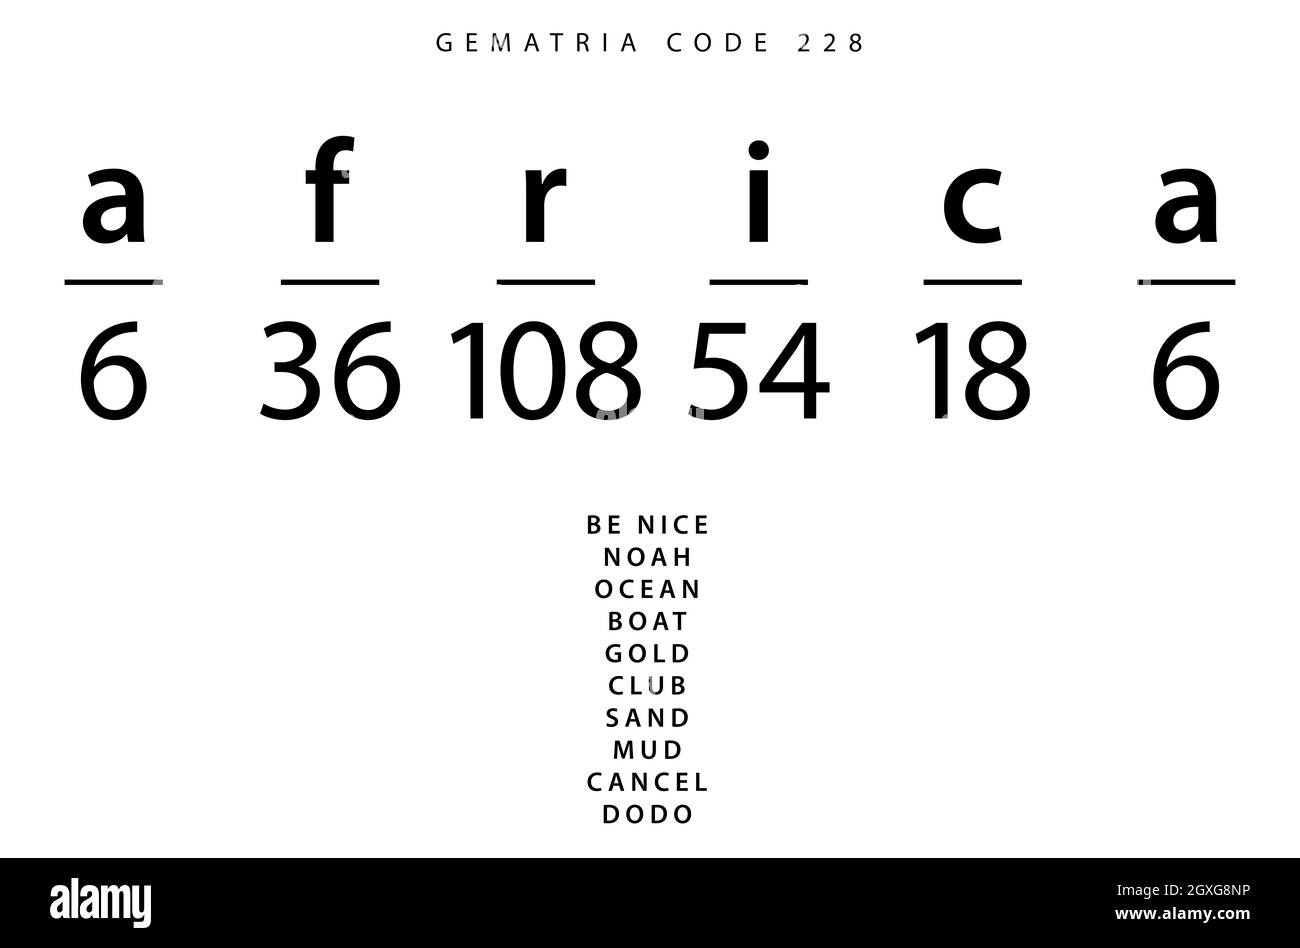 Africa word code in the English Gematria Stock Photo